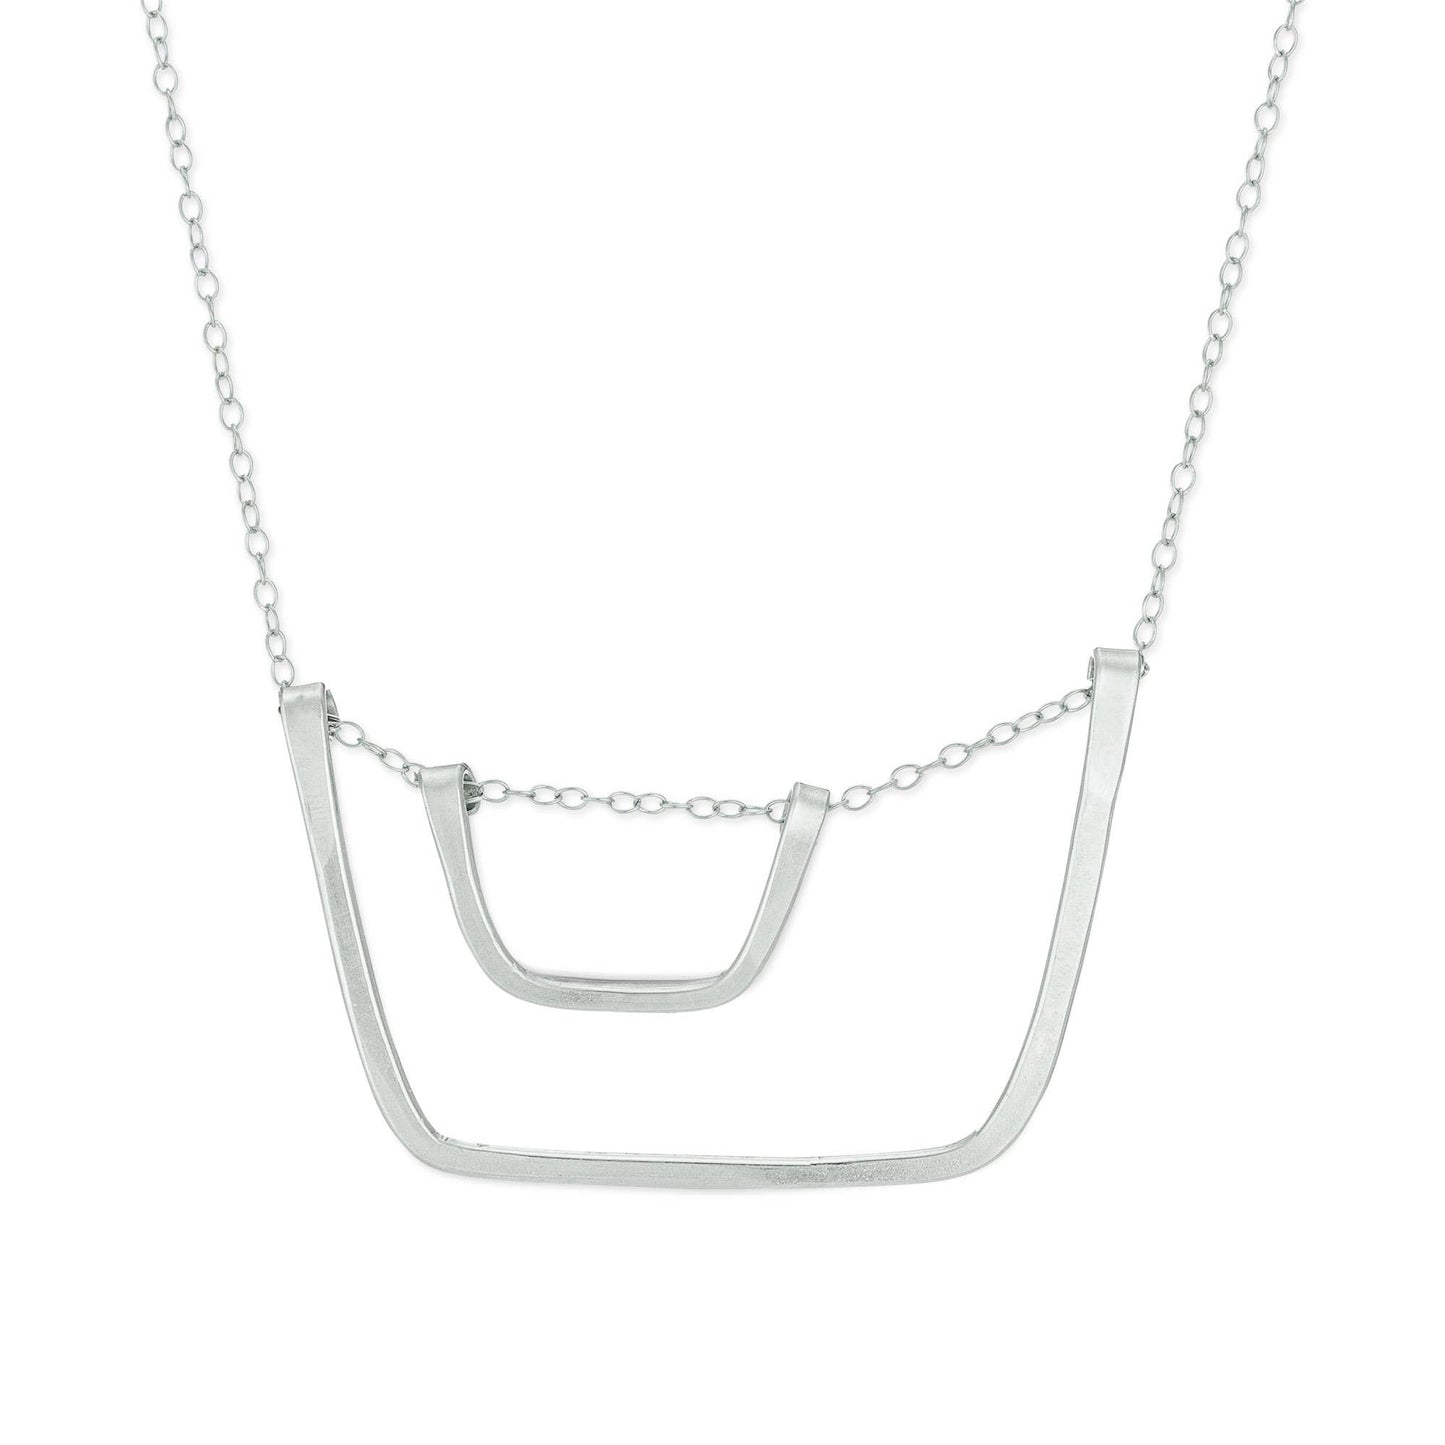 Bold Bucket & Pail Geometric Squares Handmade Necklace: Sterling silver / 16"